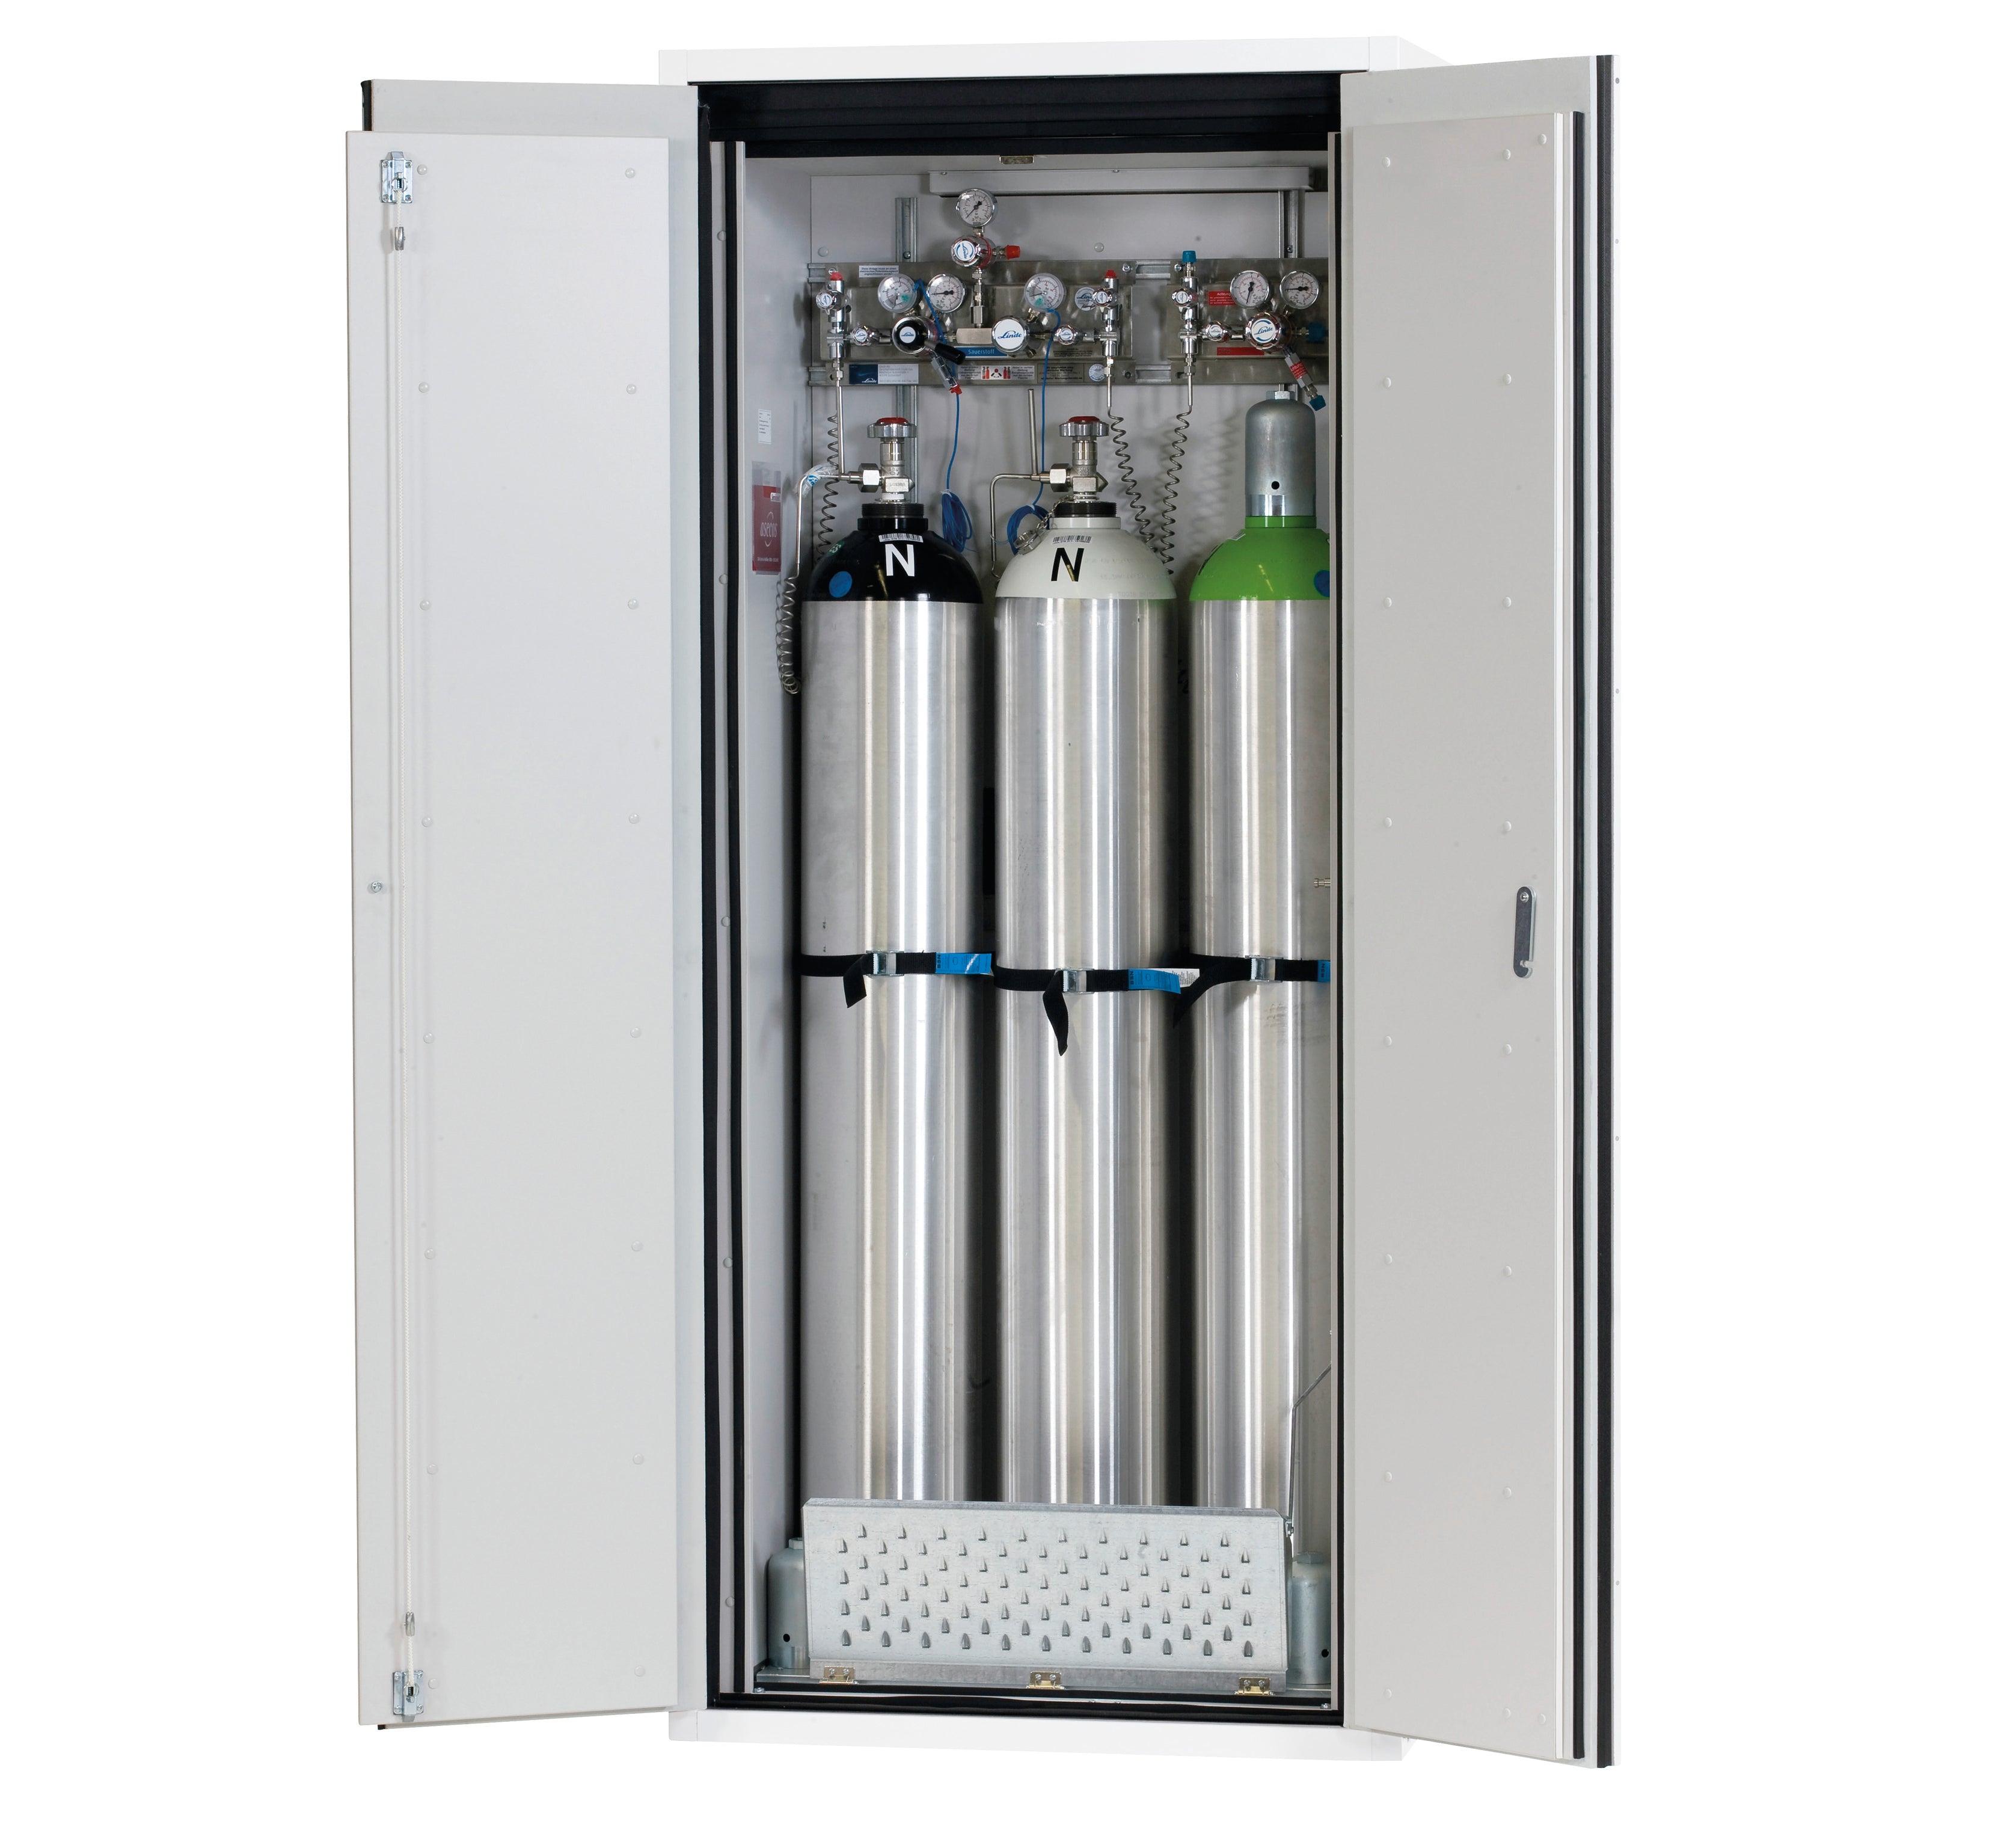 Type 90 compressed gas bottle cabinet G-ULTIMATE-90 model G90.205.090 in laboratory white (similar to RAL 9016) with comfortable interior fittings for 3x compressed gas bottles of 50 liters each